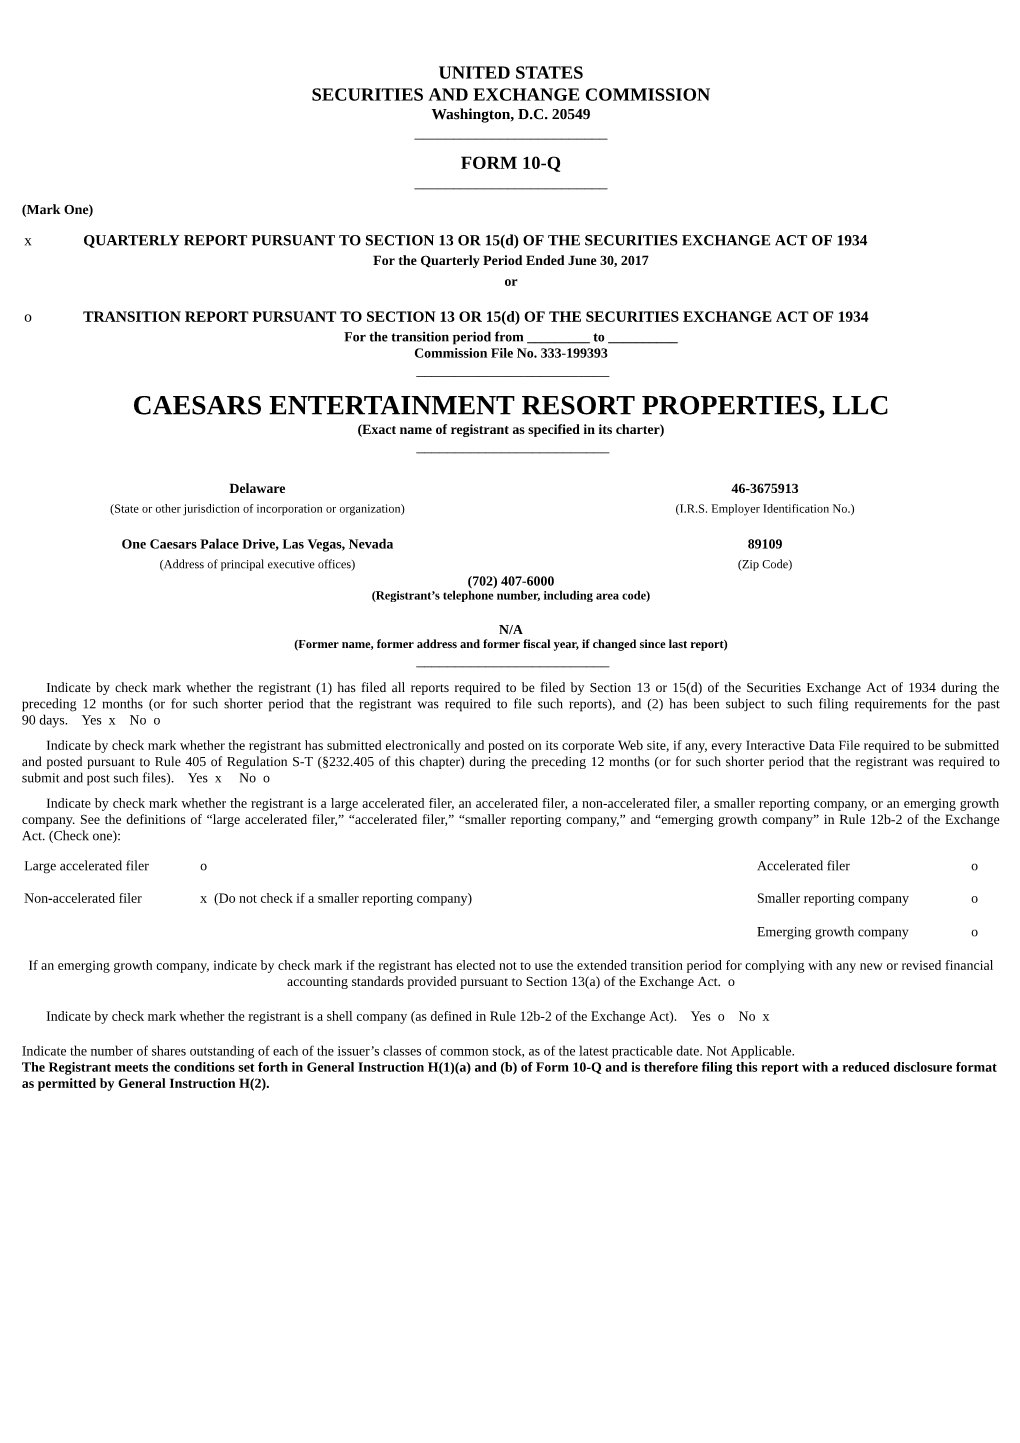 CAESARS ENTERTAINMENT RESORT PROPERTIES, LLC (Exact Name of Registrant As Specified in Its Charter) ______